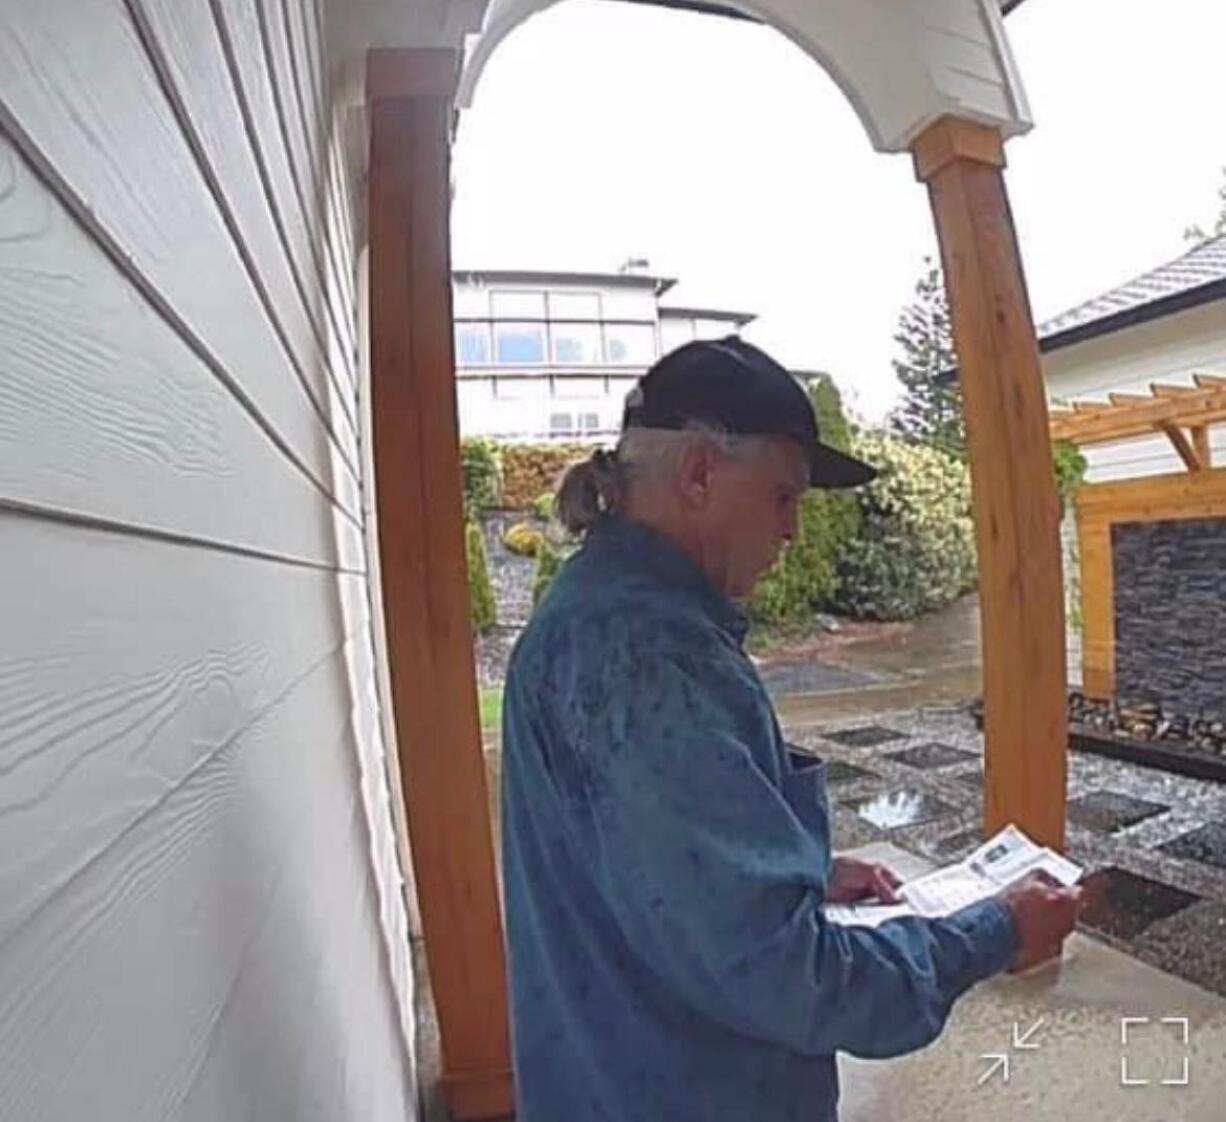 The Clark County Sheriff’s Department is looking for a serial burglar who appears to be posing as a door-to-door salesman.